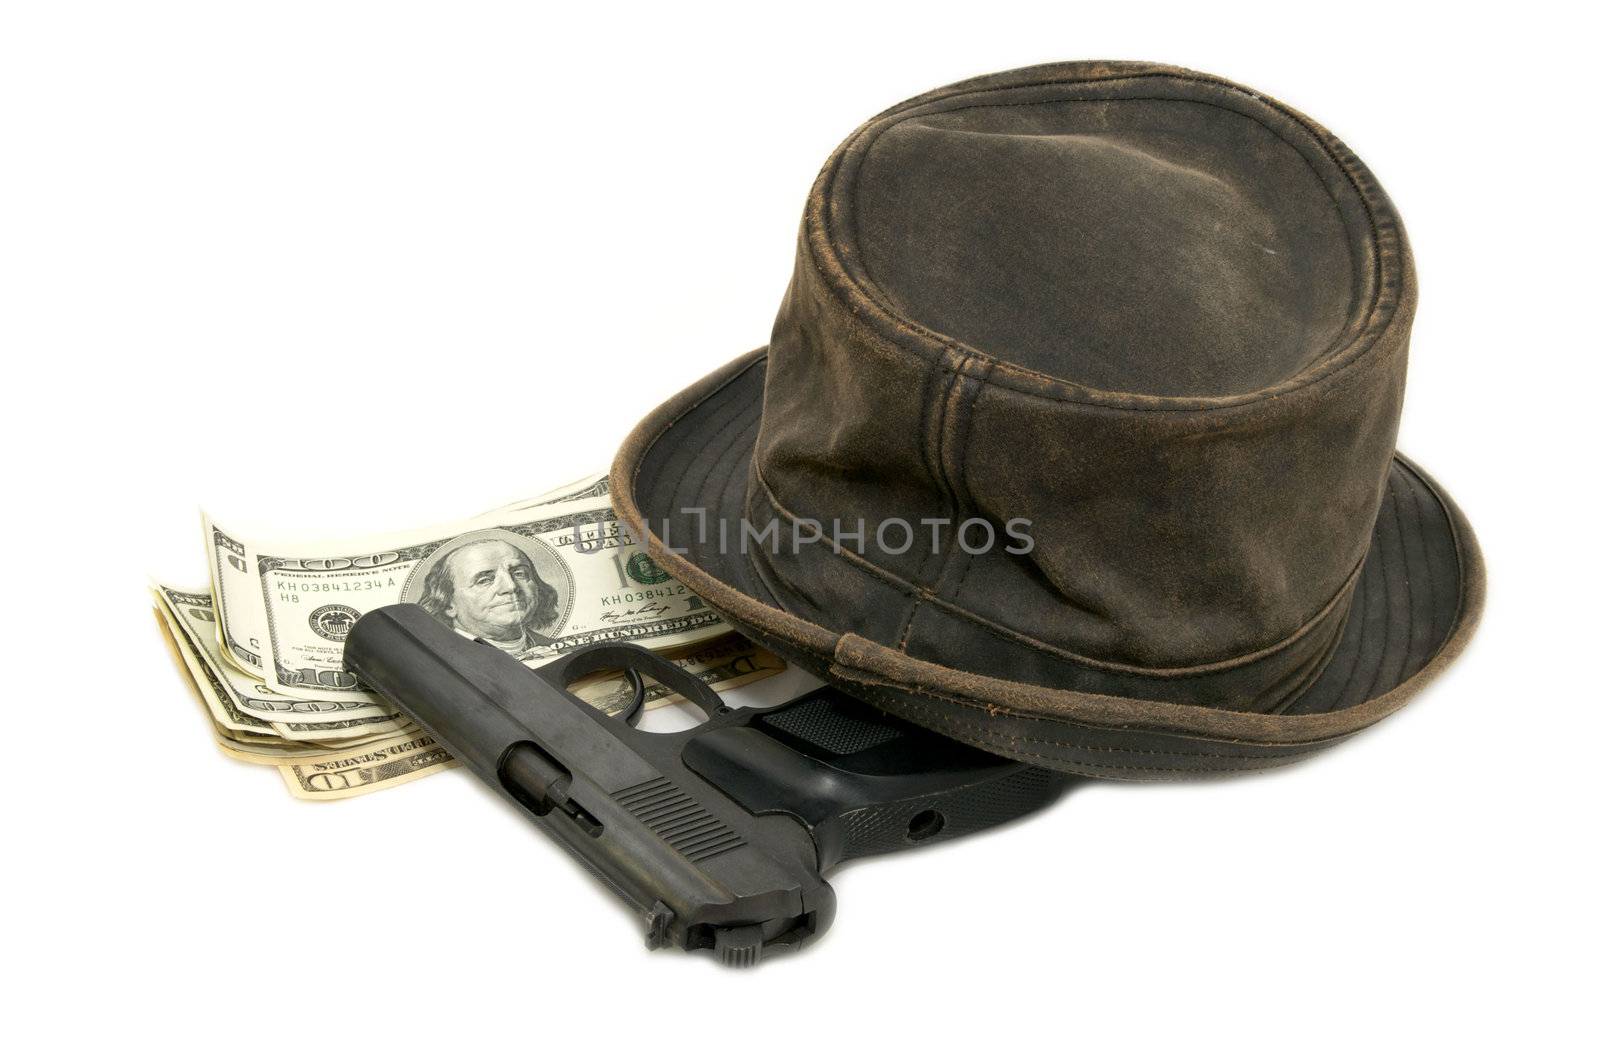 dollars and a gun and a hat by Lester120